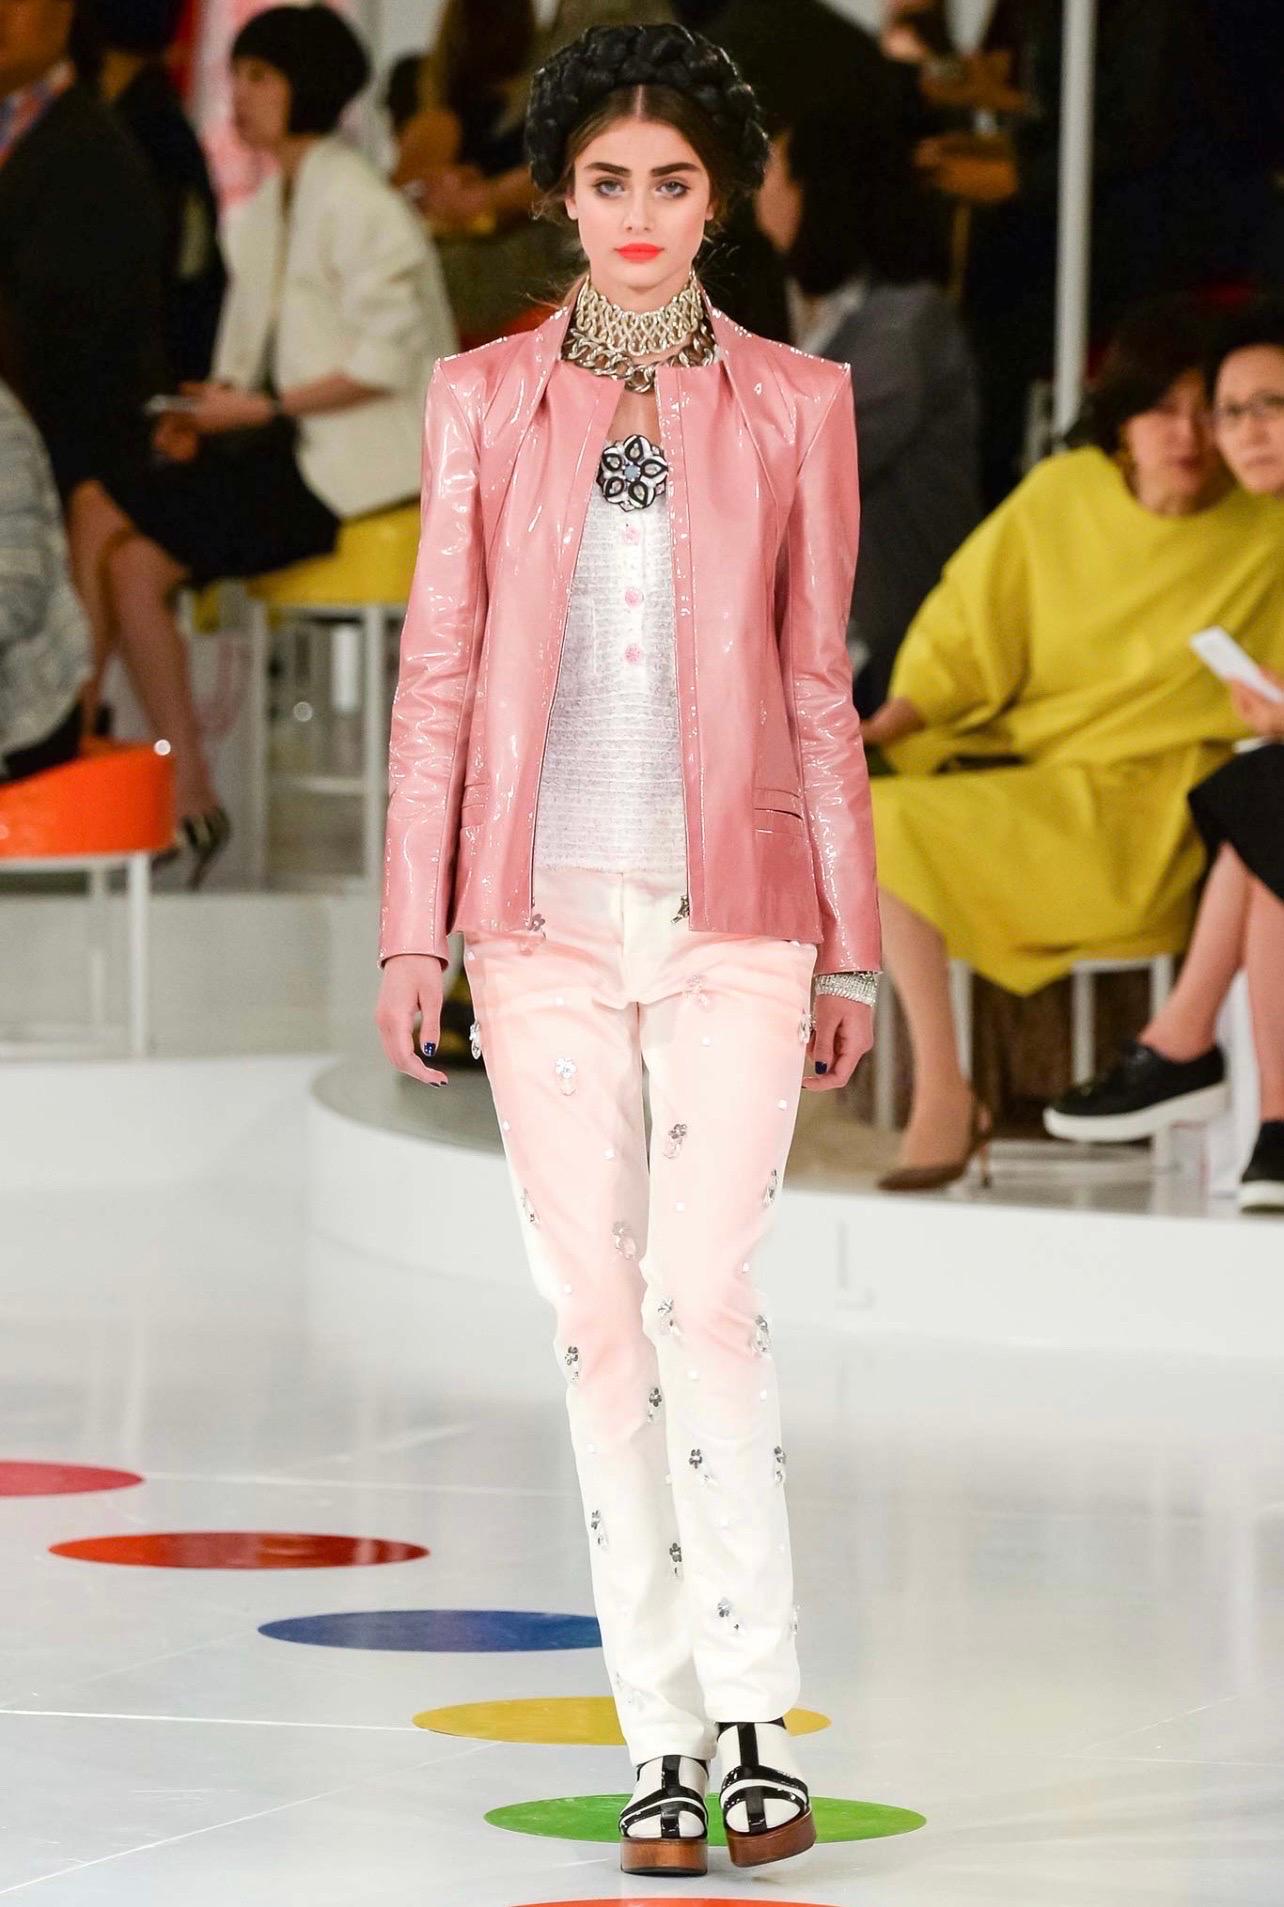 What's better than a luxe summertime tweed? Chanel took their popular and iconic tweed and made it into a spring/summer silhouette. This is look 32 from Chanel's Resort Line for 2016 that is featured in a gorgeous and understated white and pink